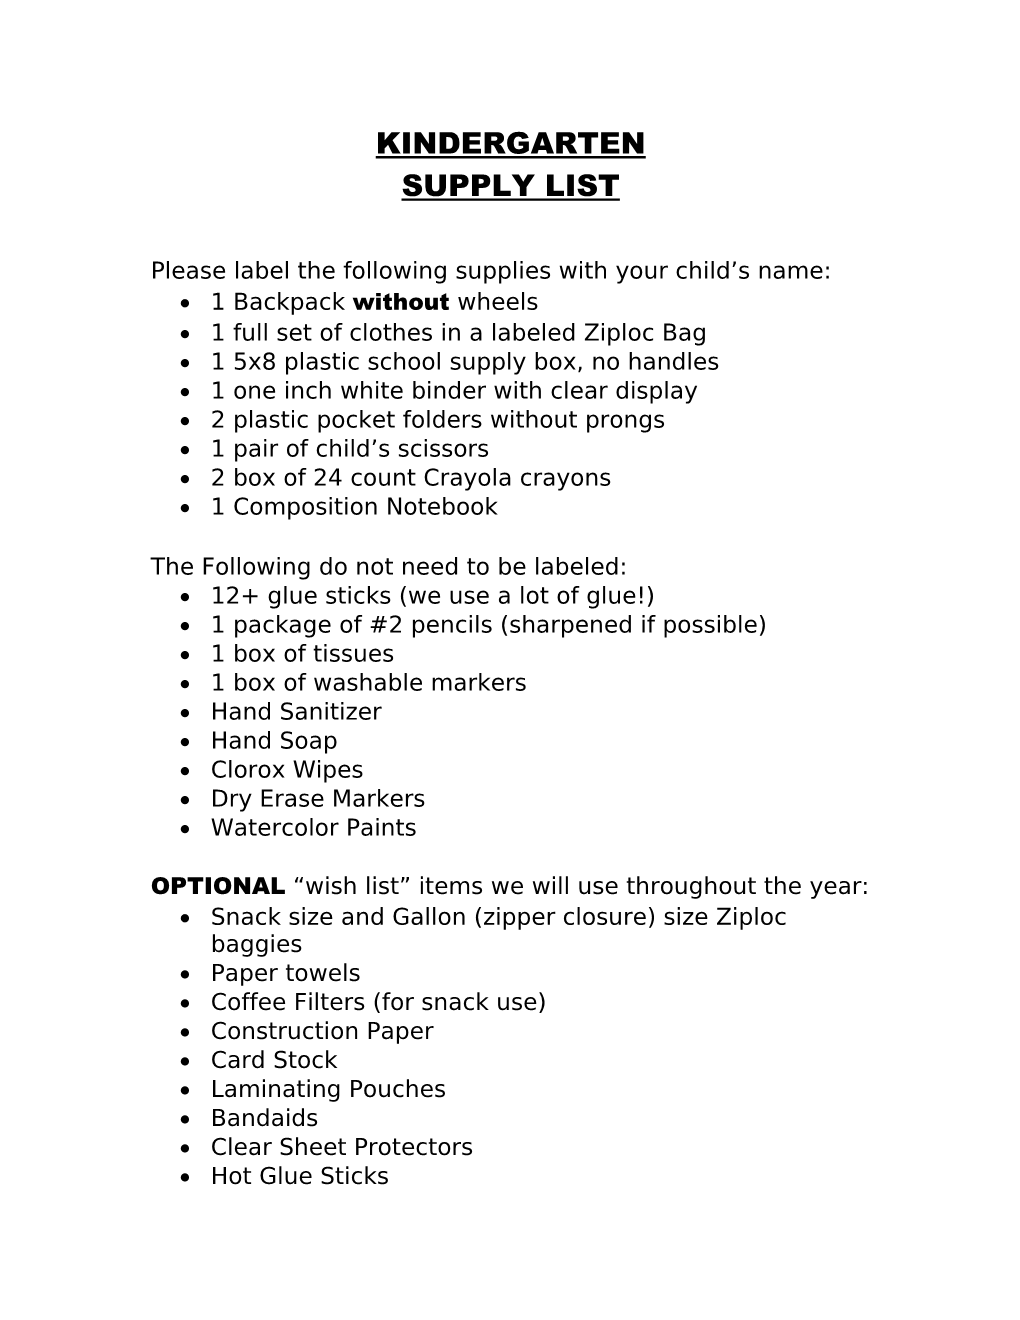 Please Label the Following Supplies with Your Child S Name